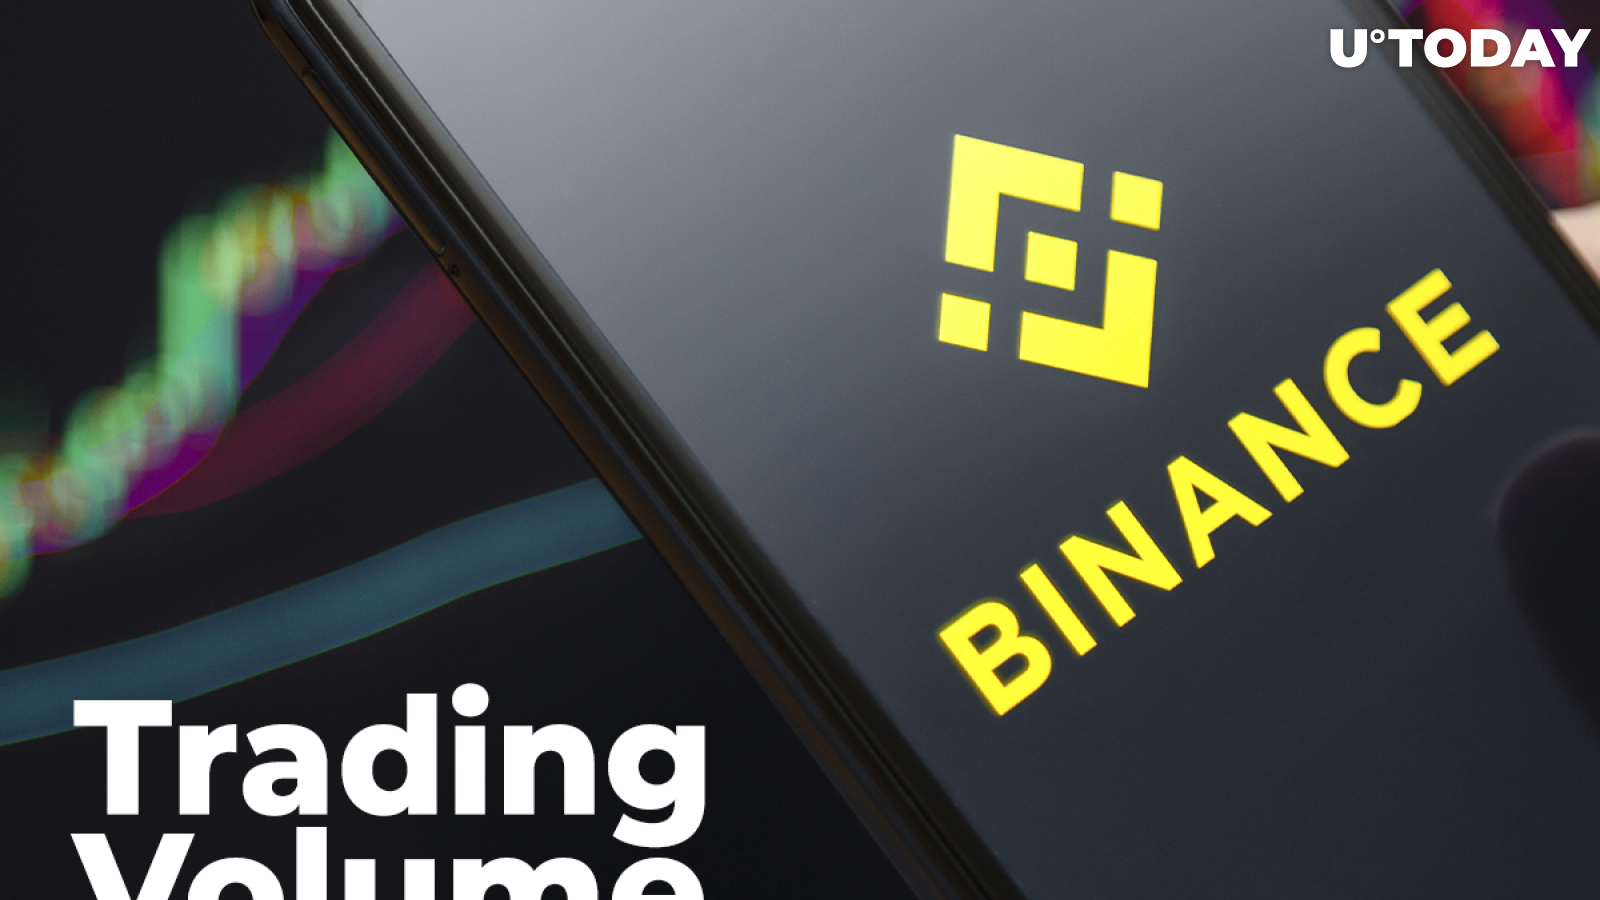 Binance’s Trading Volume Hits $100 Billion in Just One Day